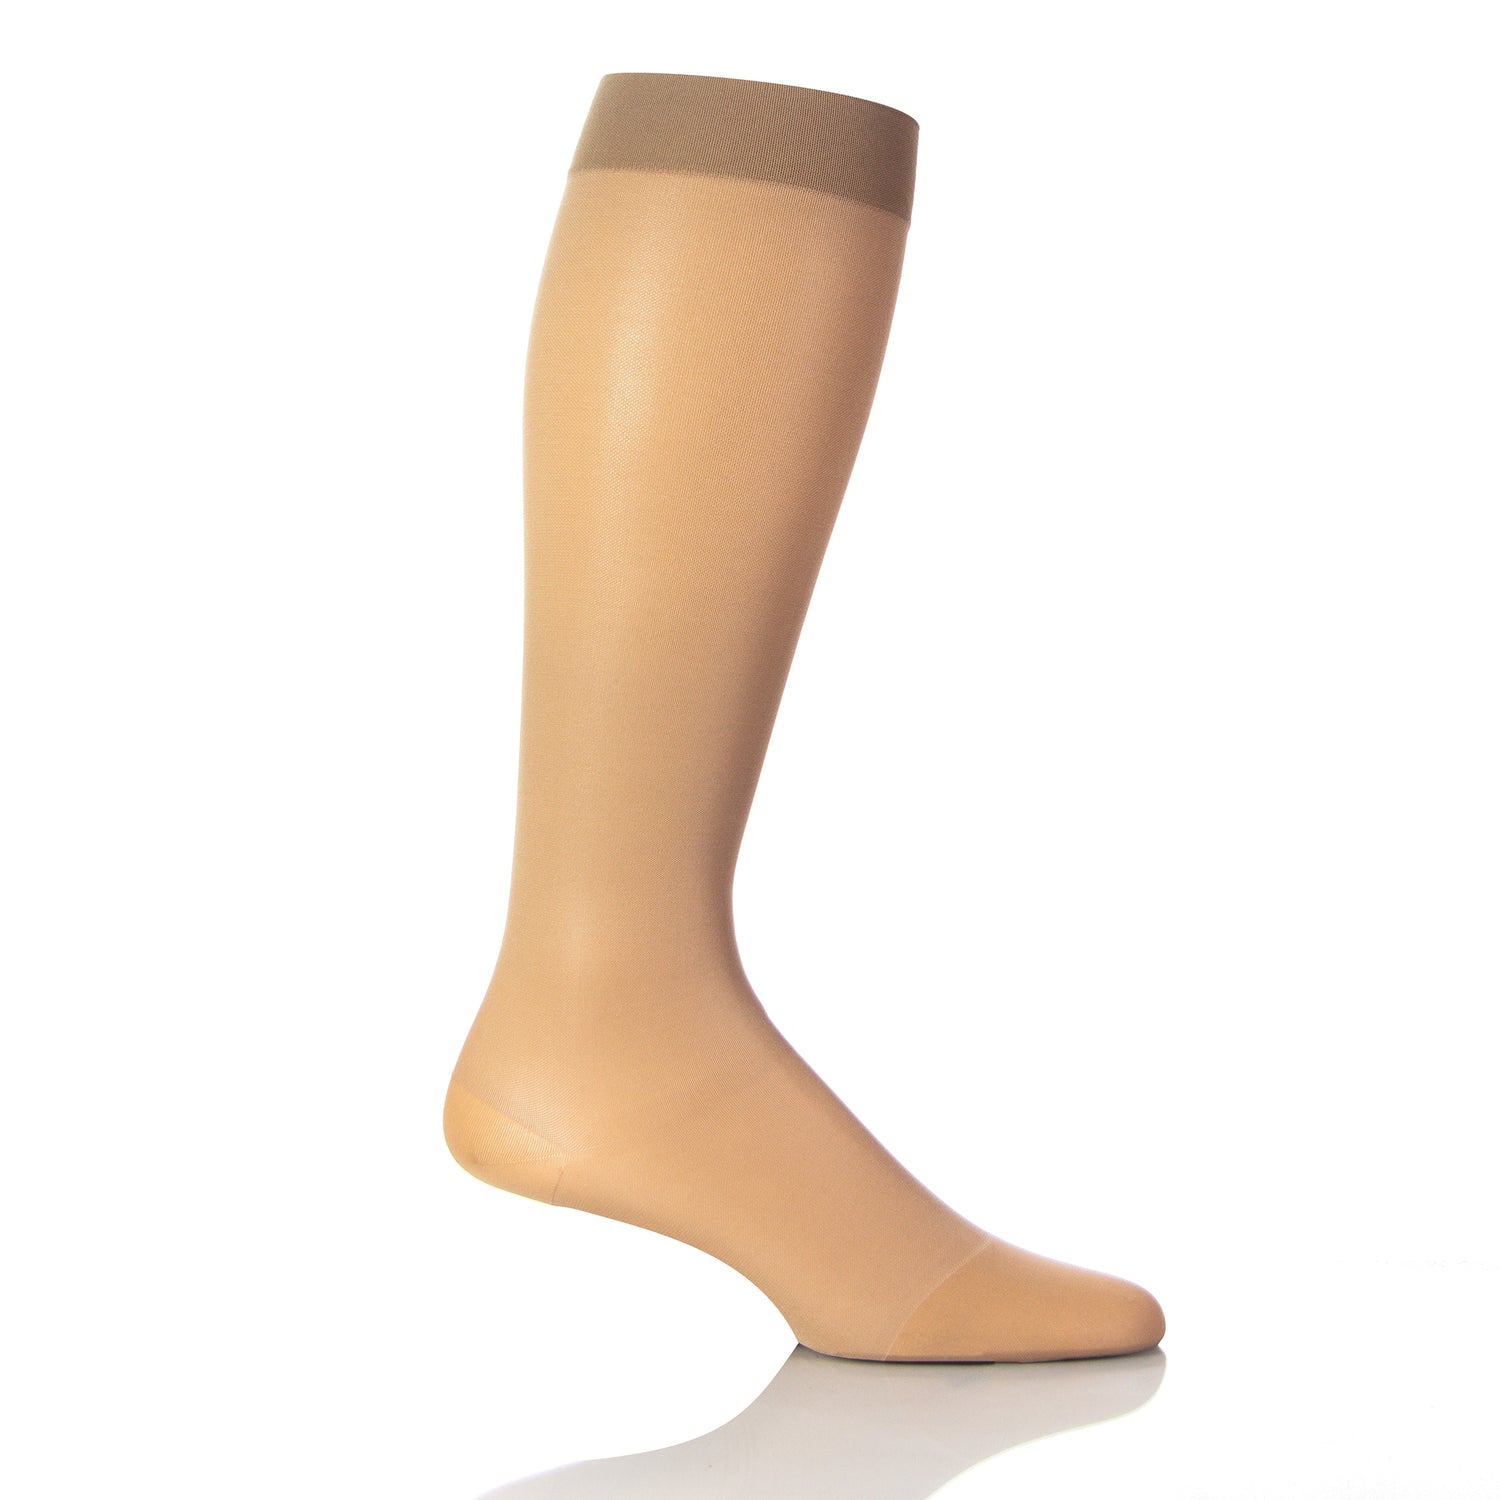  Compression Socks for Women Plus Size Compression Socks Wide  Calf Men Women Medias de Compresion para Mujer Circulation Support Medical  Pro 20-30mmHg Knee High Mens Womens Compression Socks 4XL Beige 